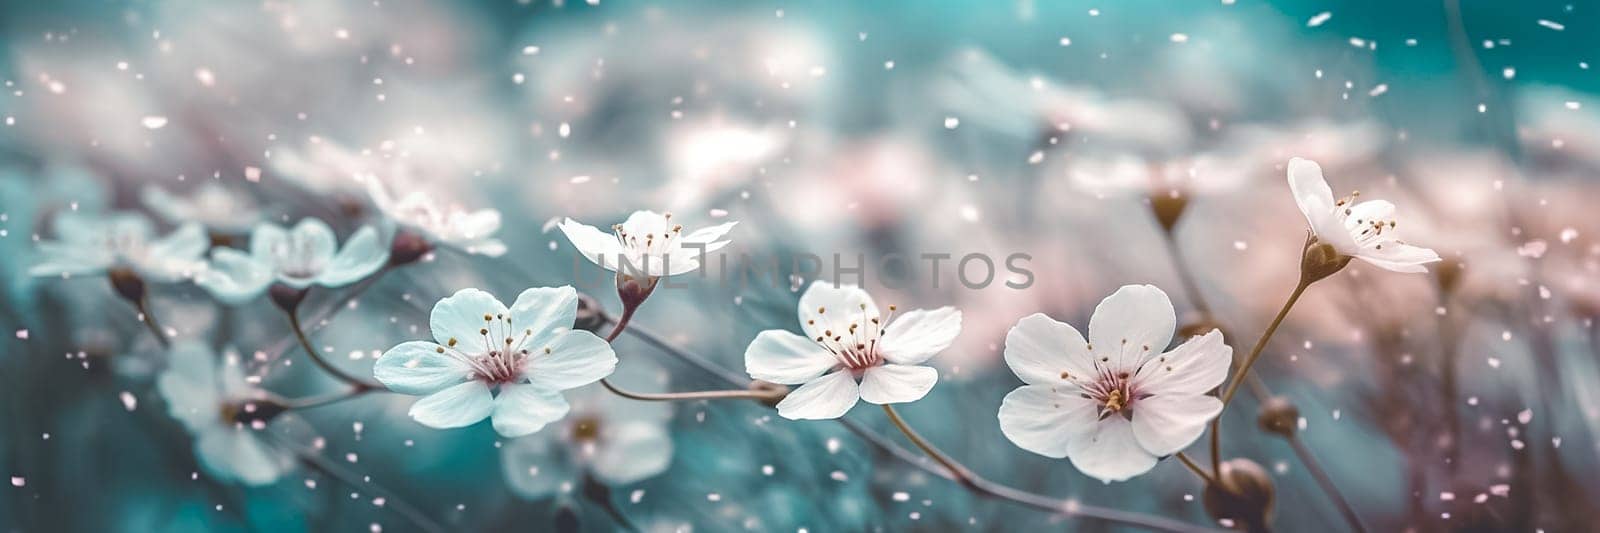 Long summer banner with white Wildflowers or Field flowers close up. White wild flowers on a blurred dark blue background